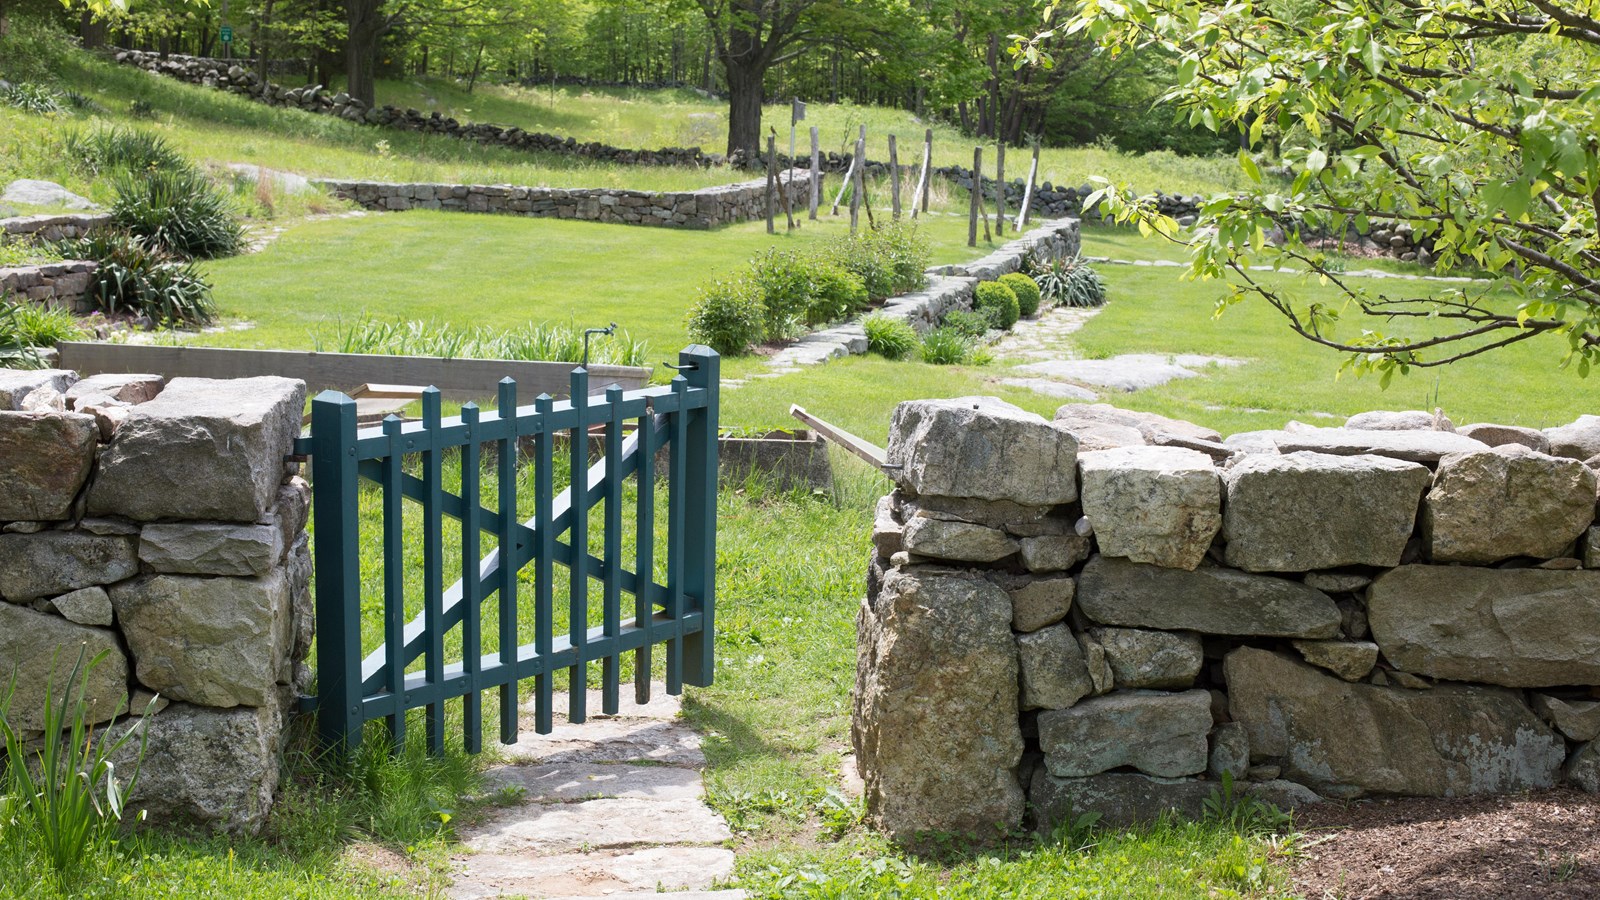 A green gate in a stone wall that leads into a grassy meadow.